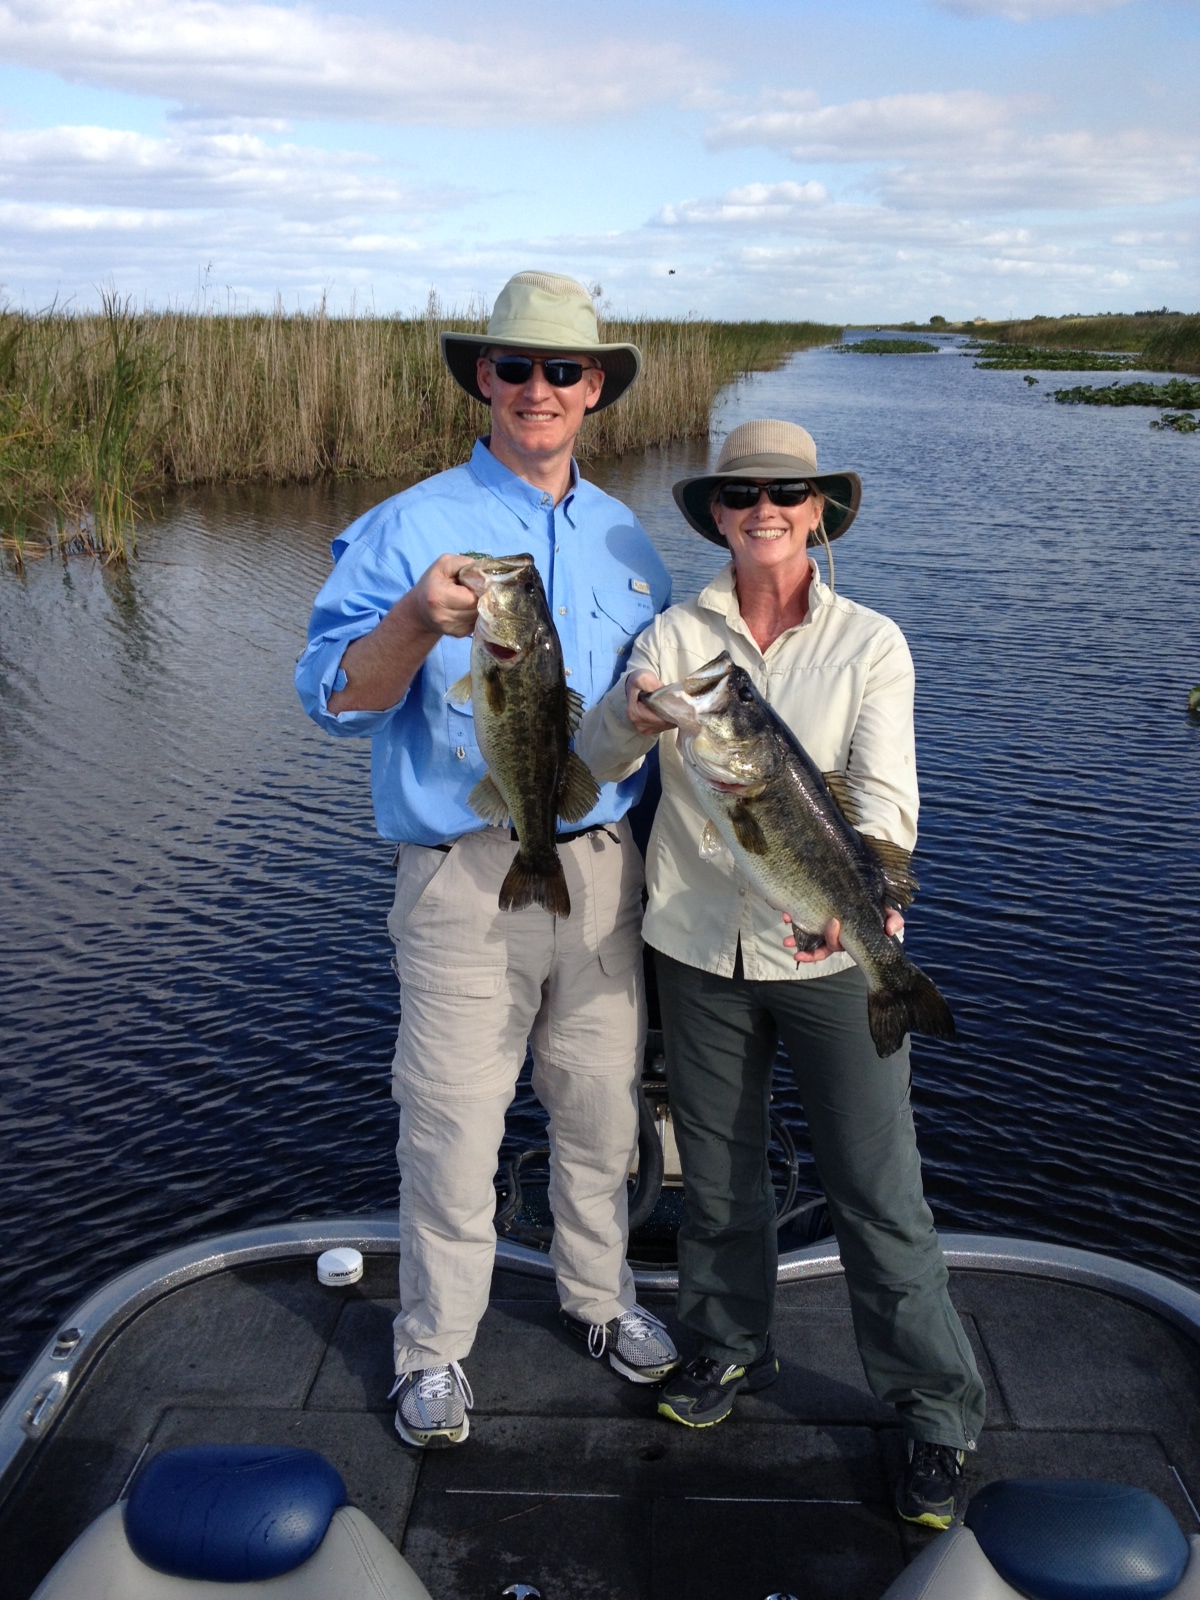 March 10, 2013 – Fishing Report